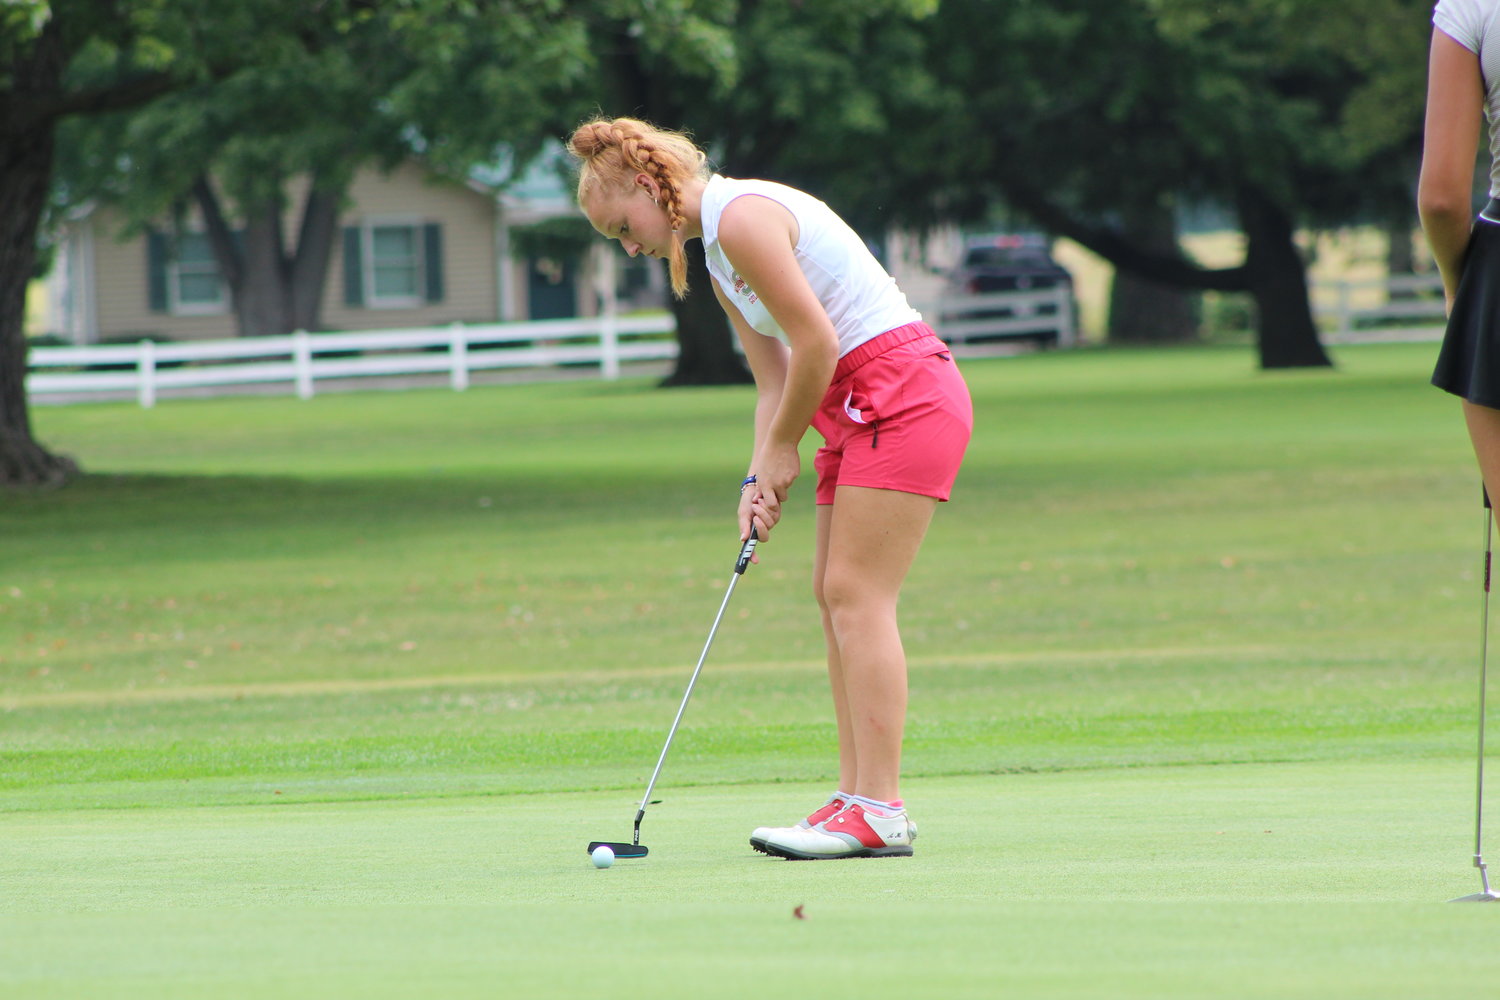 Southmont’s Addison Meadows earned medalist and 1st-Team All-Sagamore Conference honors with her 78 at the SAC Meet on Saturday.